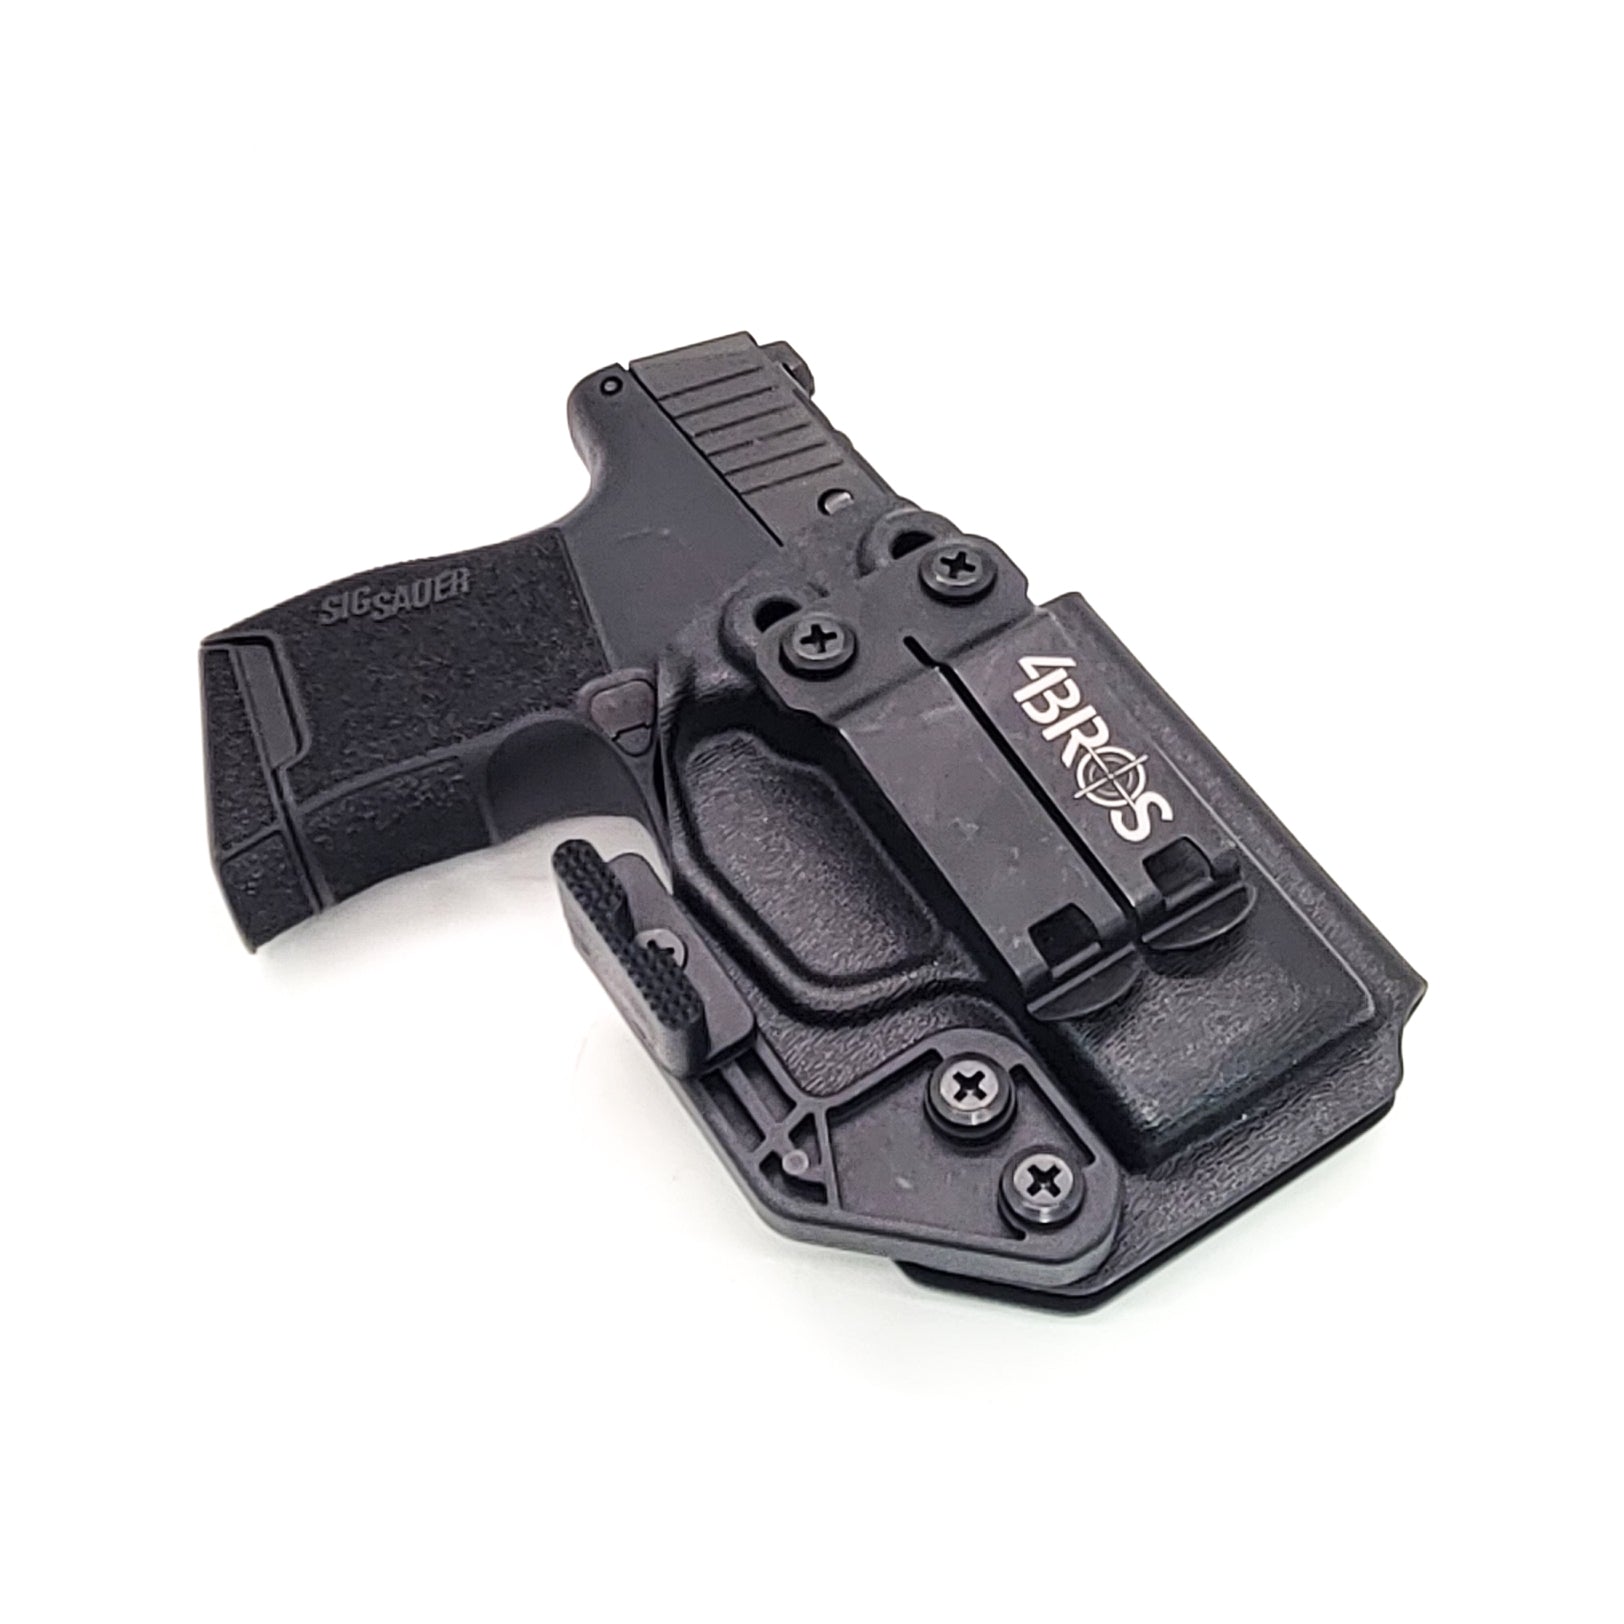 For the Best, most comfortable inside waistband Kydex holster designed to fit the Sig Sauer P365 pistol, shop Four Brothers Holsters. Cleared for a red dot sight, Adjustable retention, high sweat guard, smooth edges, and minimal material for improved comfort and concealment. Made in the USA IWB AIWB 4BROS P 365